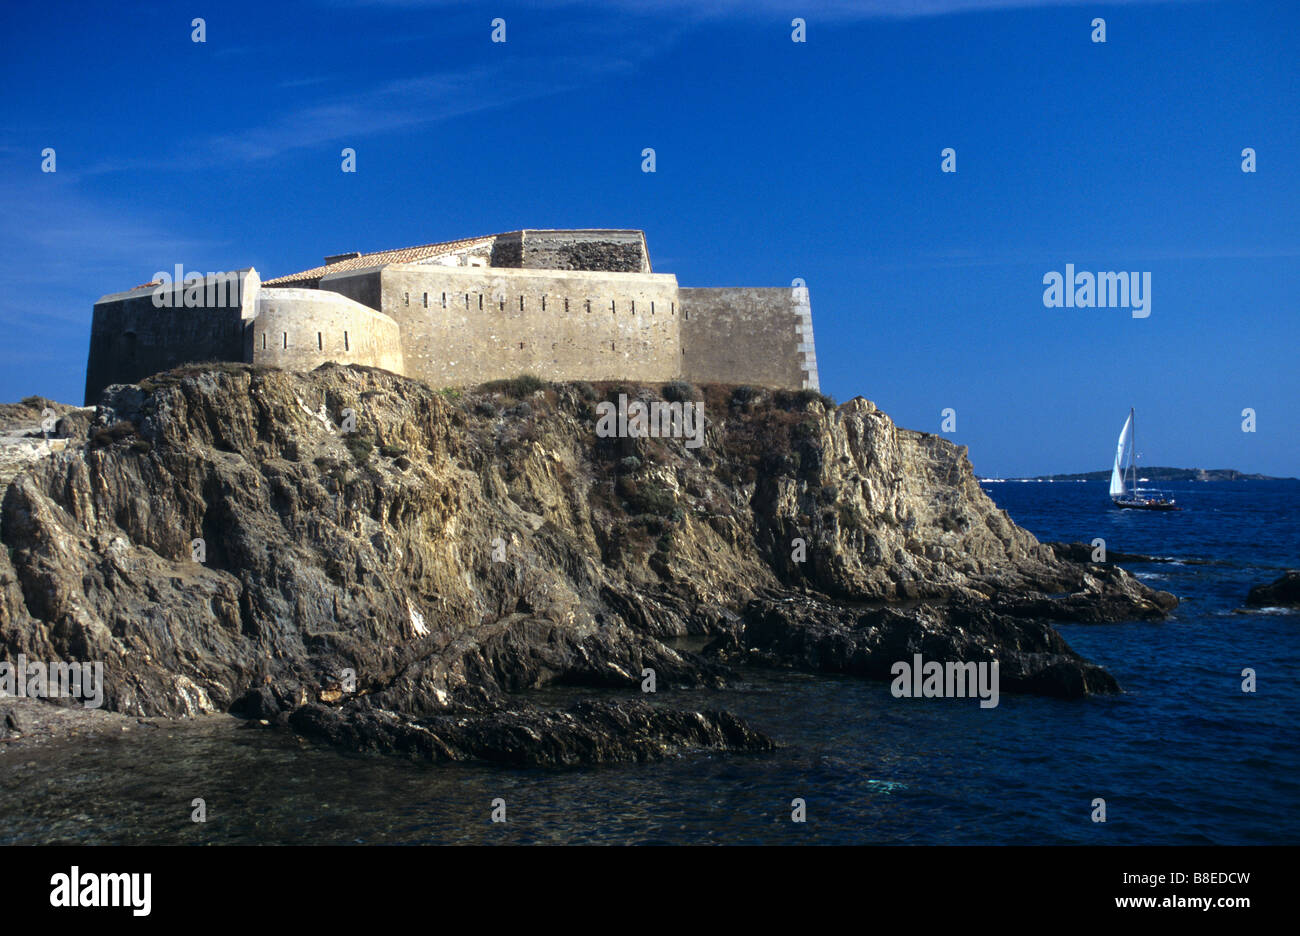 La Tour Fondue, Fort or Fortification, and Yacht, Giens Peninsula, near  Hyères, Côte d'Azur, Provence, France Stock Photo - Alamy